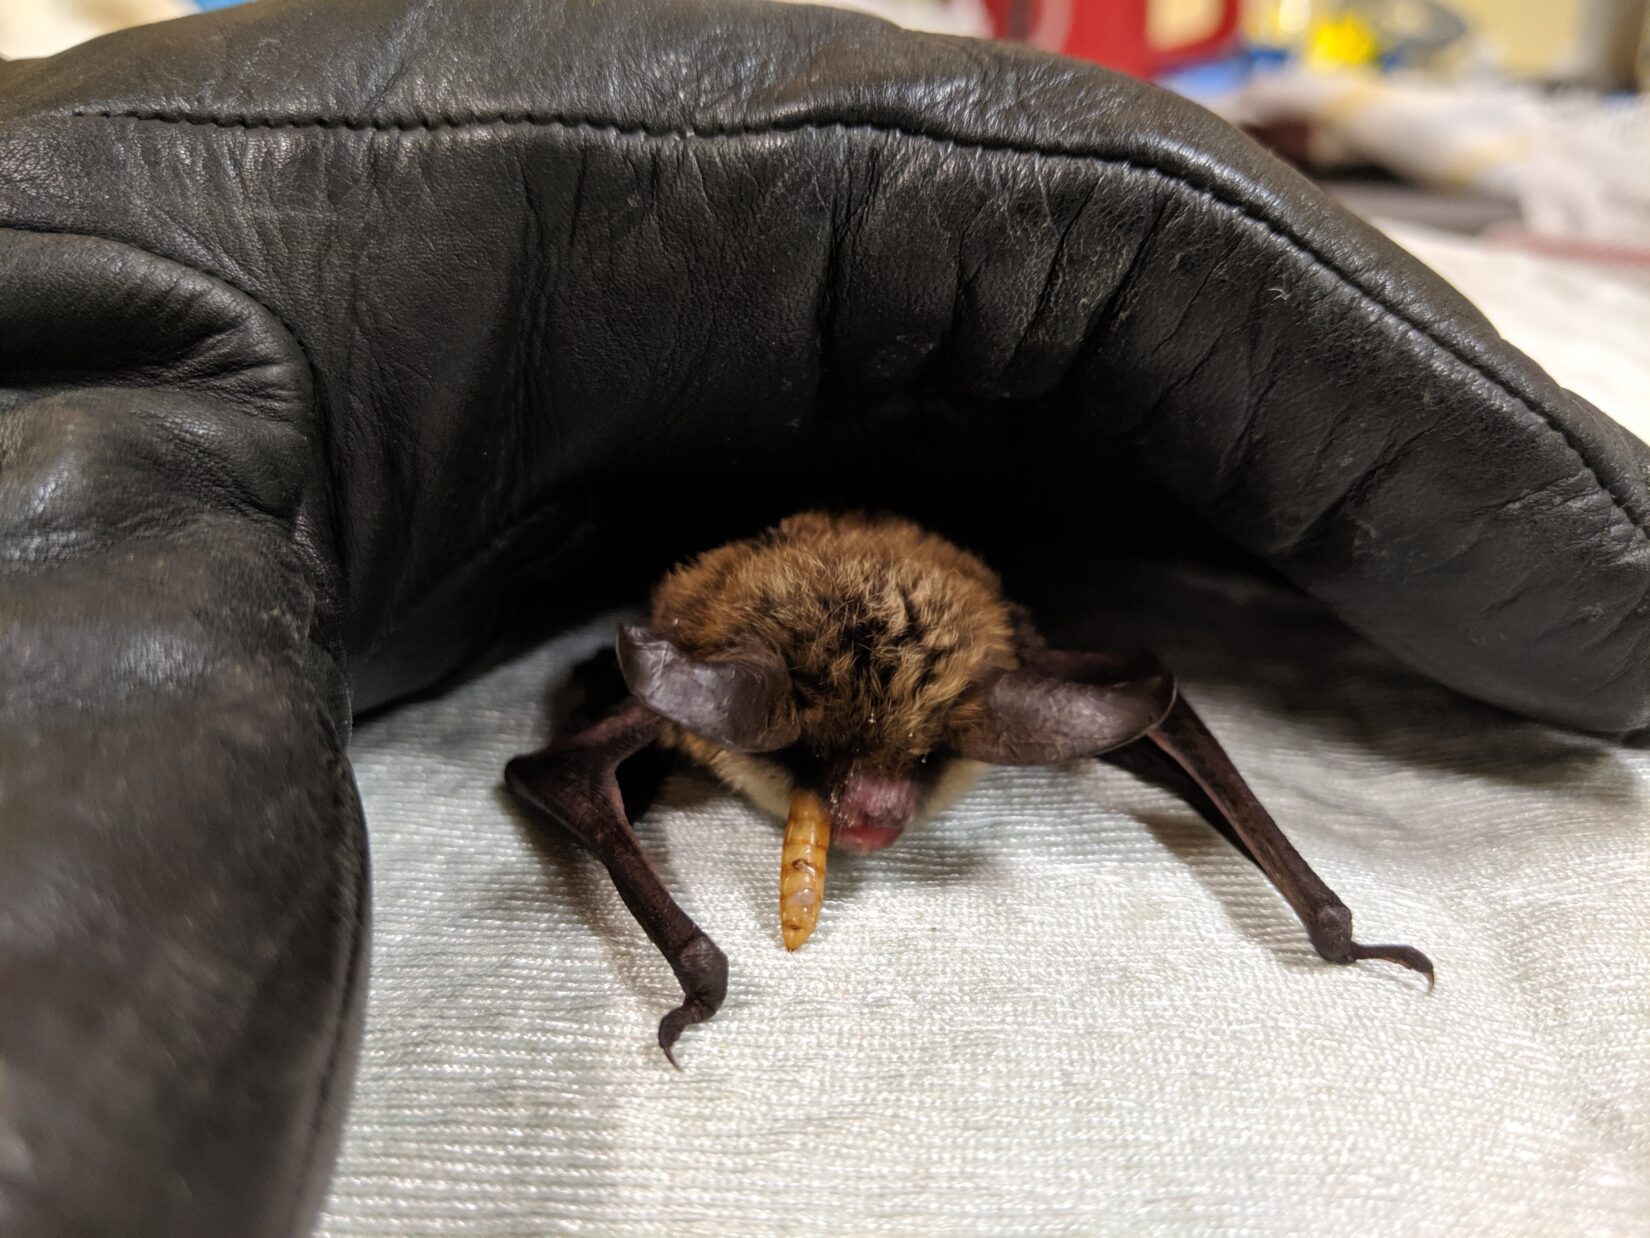 Little brown bat patient at Wild ARC, eating a mealworm on a towel